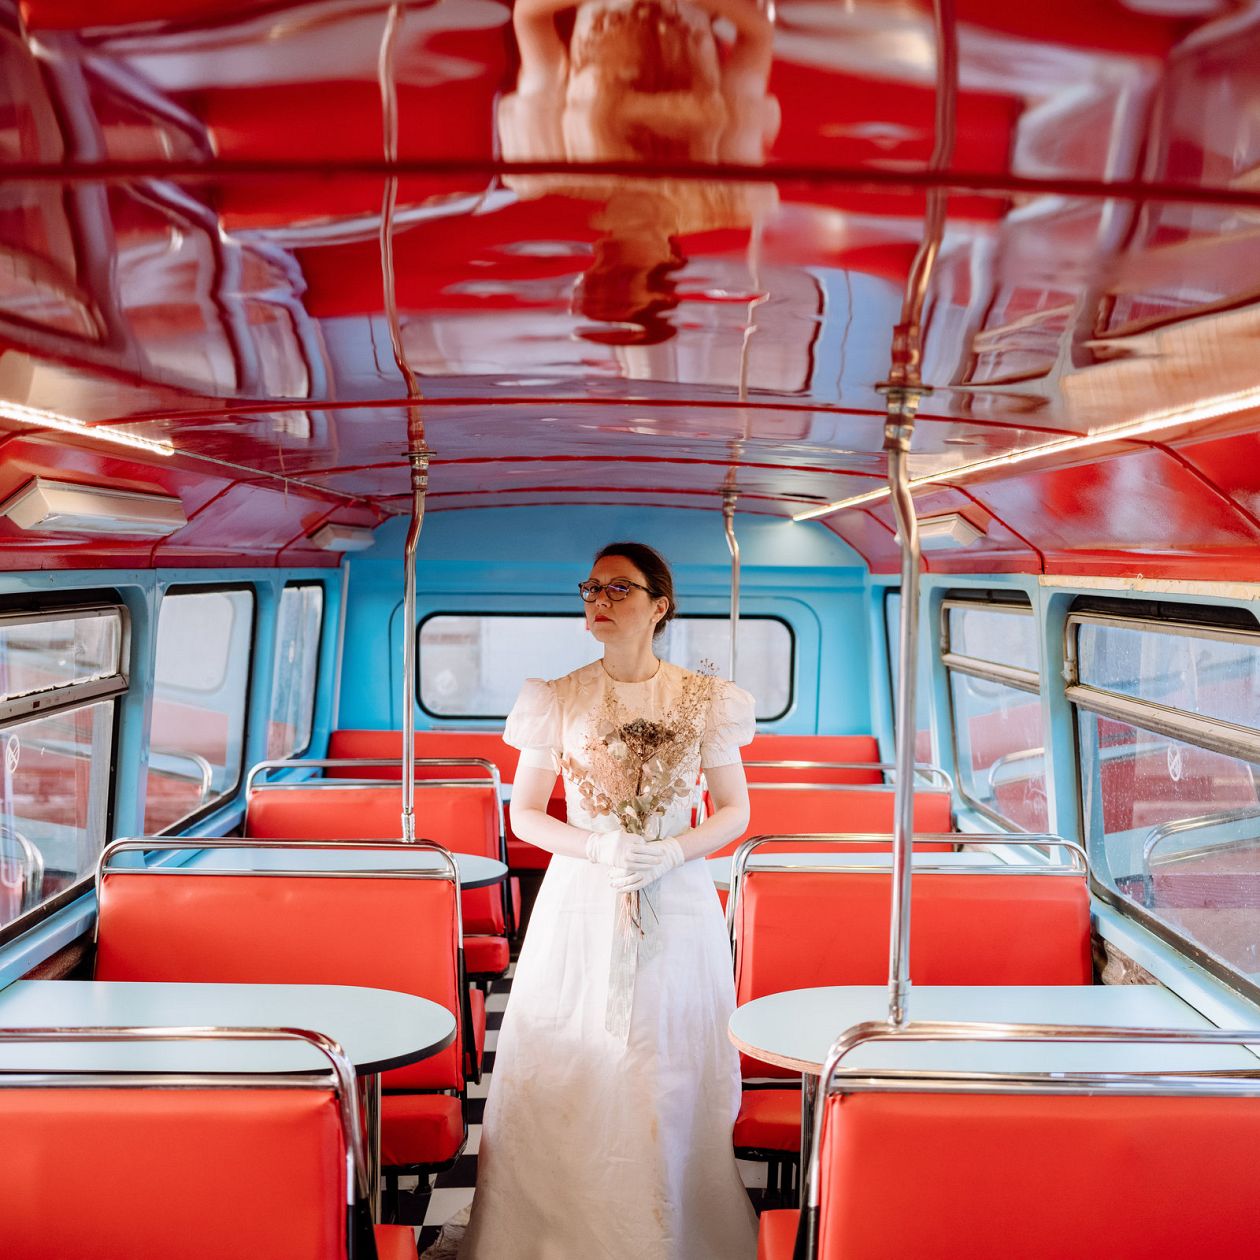 Wedding day. Beautiful bride in white wedding dress and veil posing in a bus.